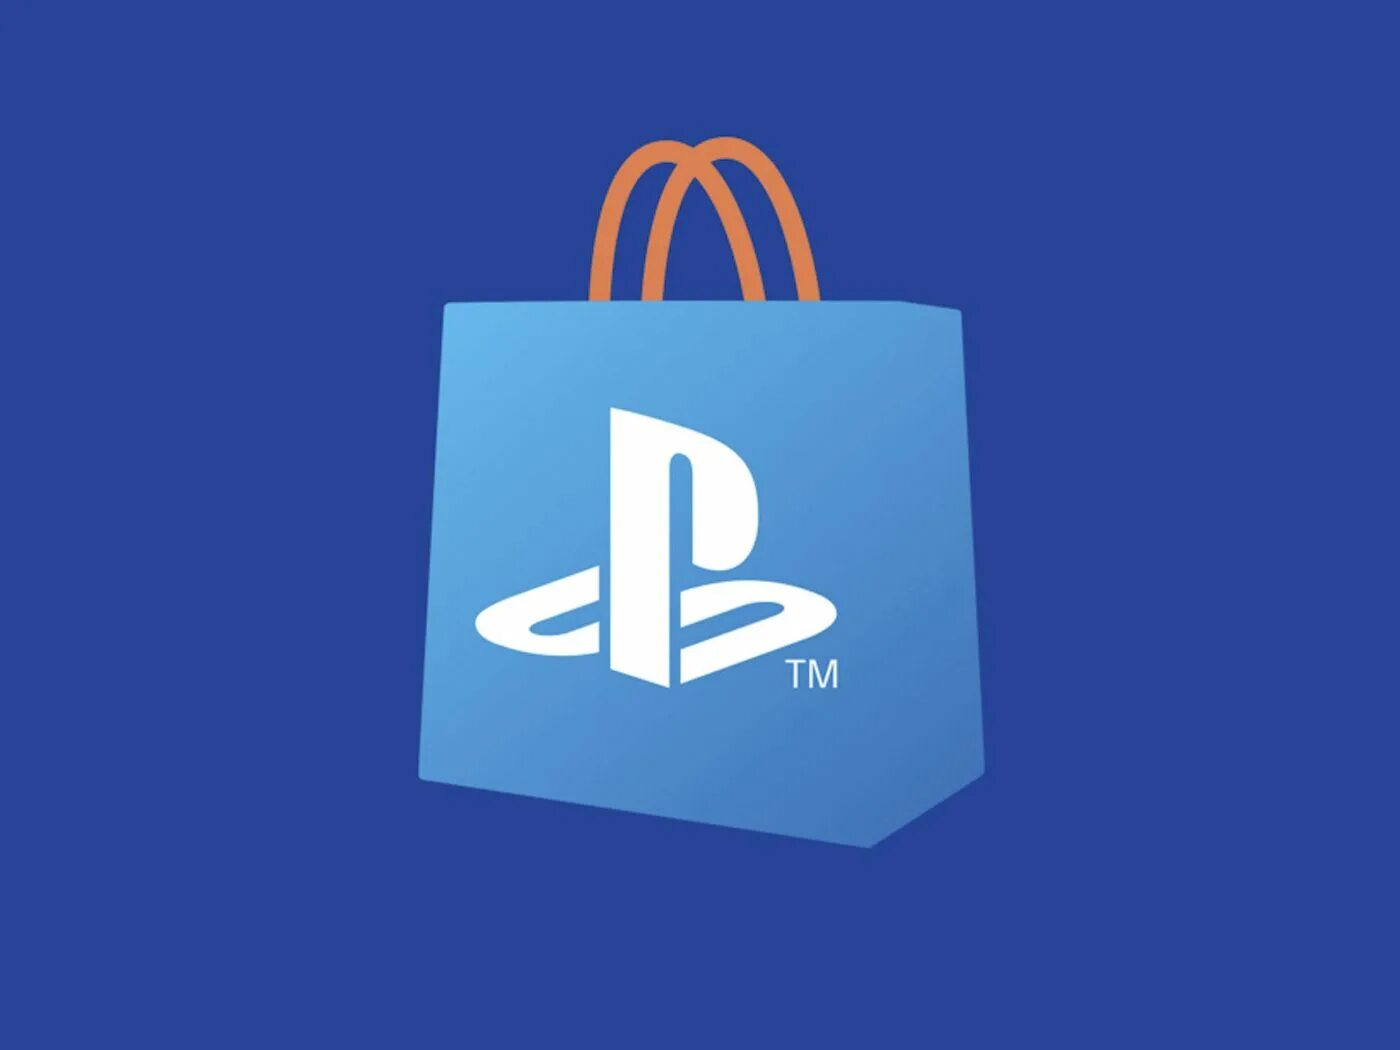 Кошелек ps5. Sony PLAYSTATION Store. PS Store ps5. PLAYSTATION Store logo. Значок плейстейшен 4.